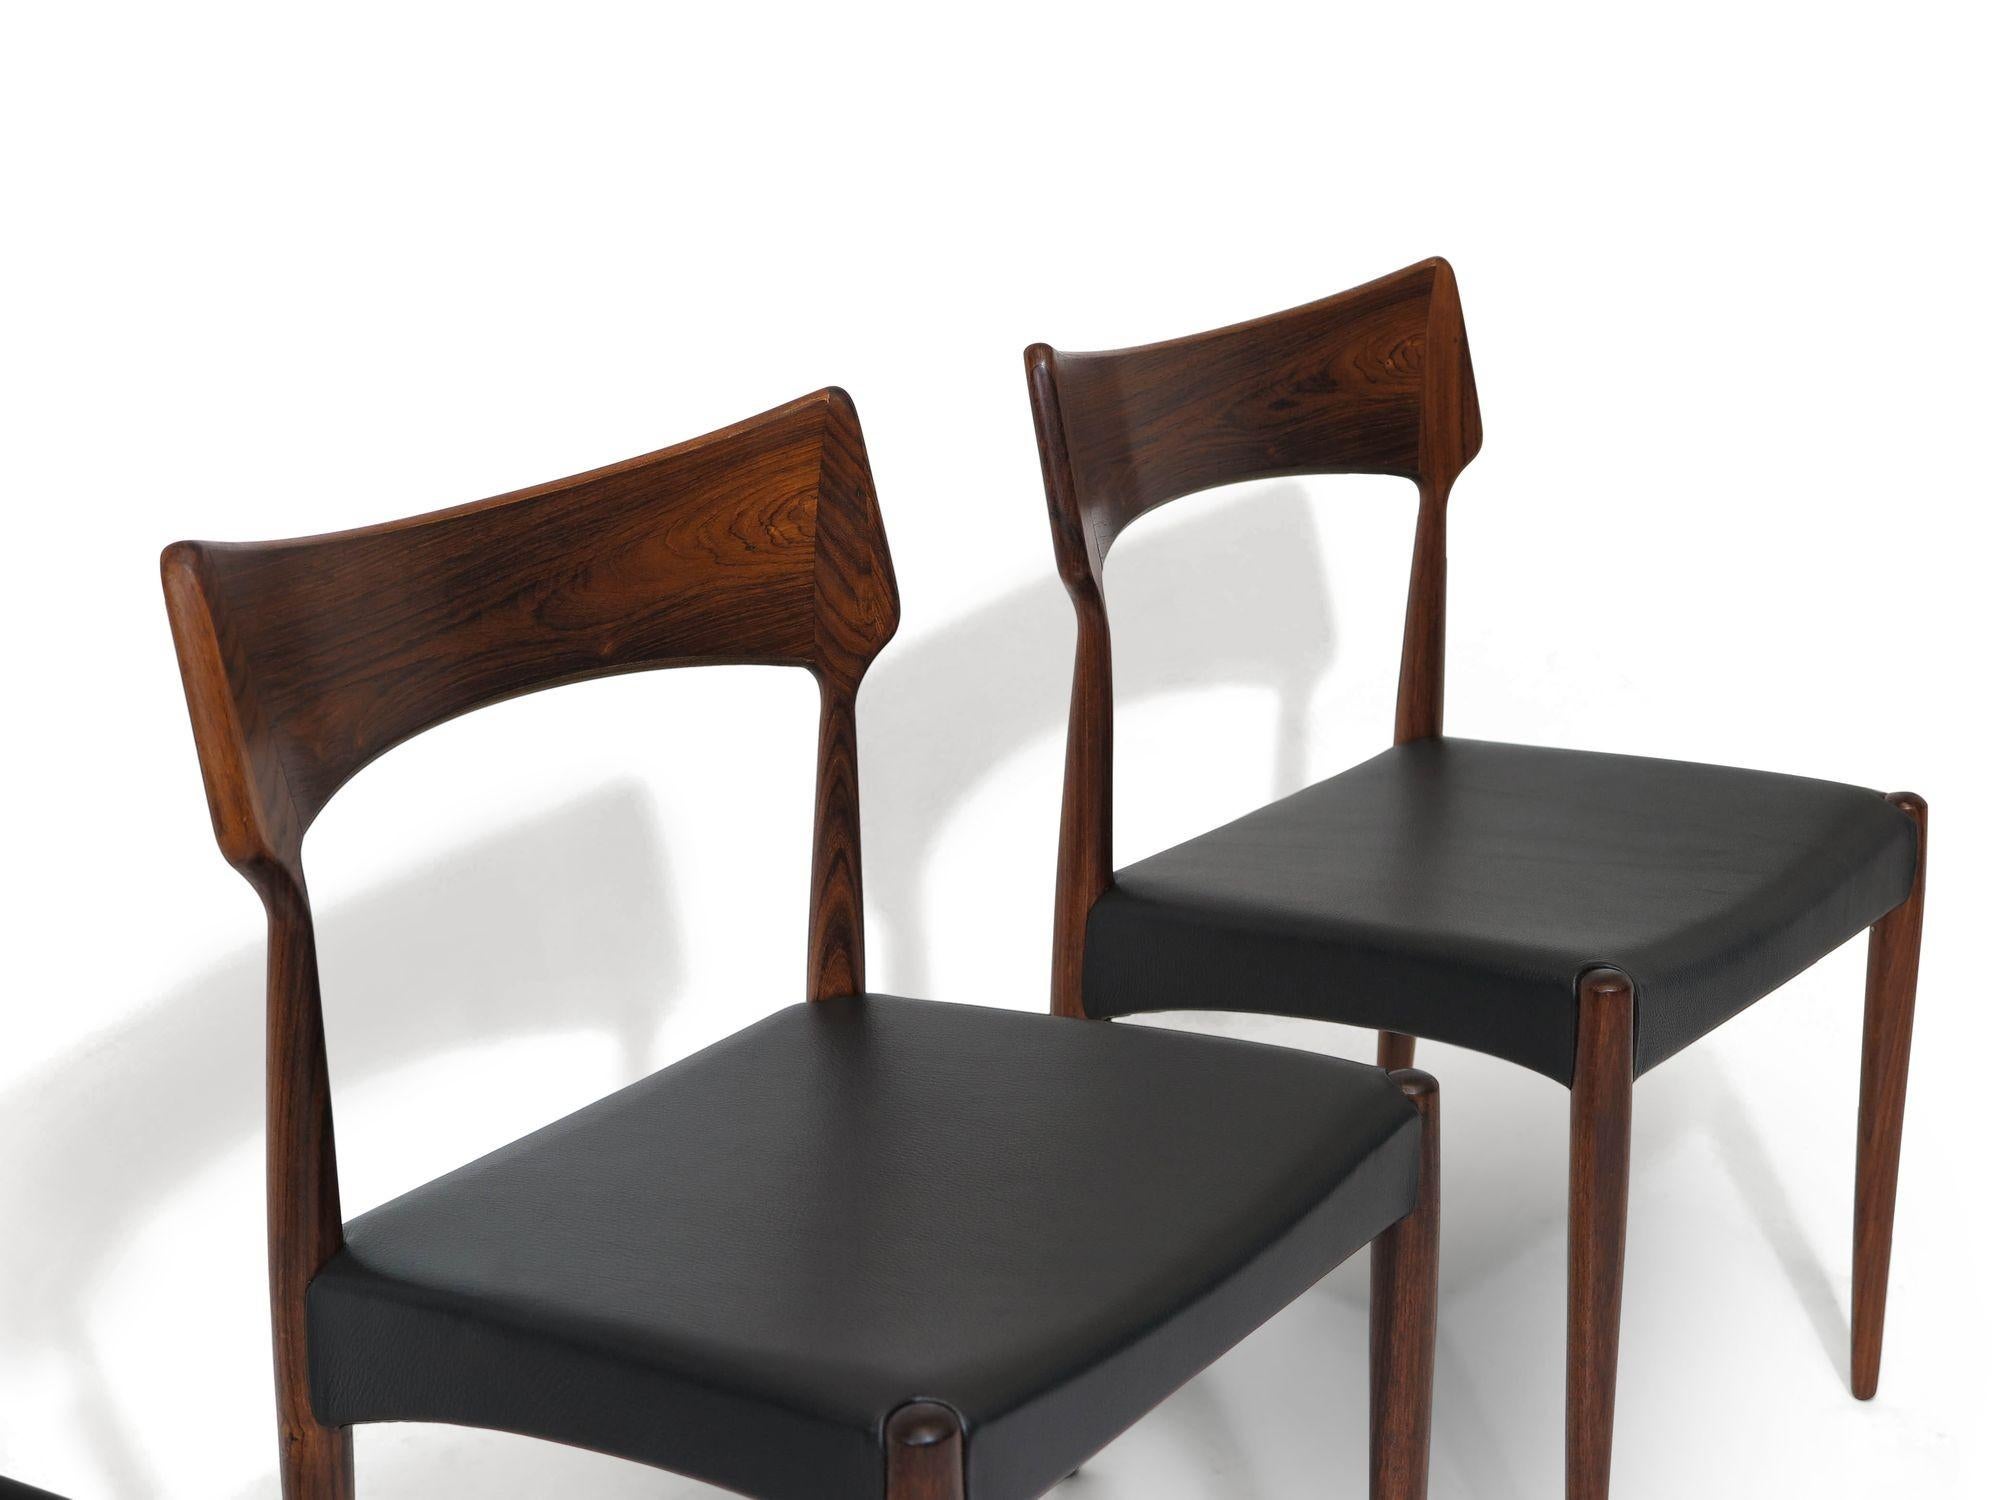 Four Brazilian Rosewood dining chairs manufactured by Bernhart Pedersen & Sons, Denmark. Newly upholstery upholstered in black leather. The chairs in in excellent condition with minor signs of age and use.
Measurements
W 20